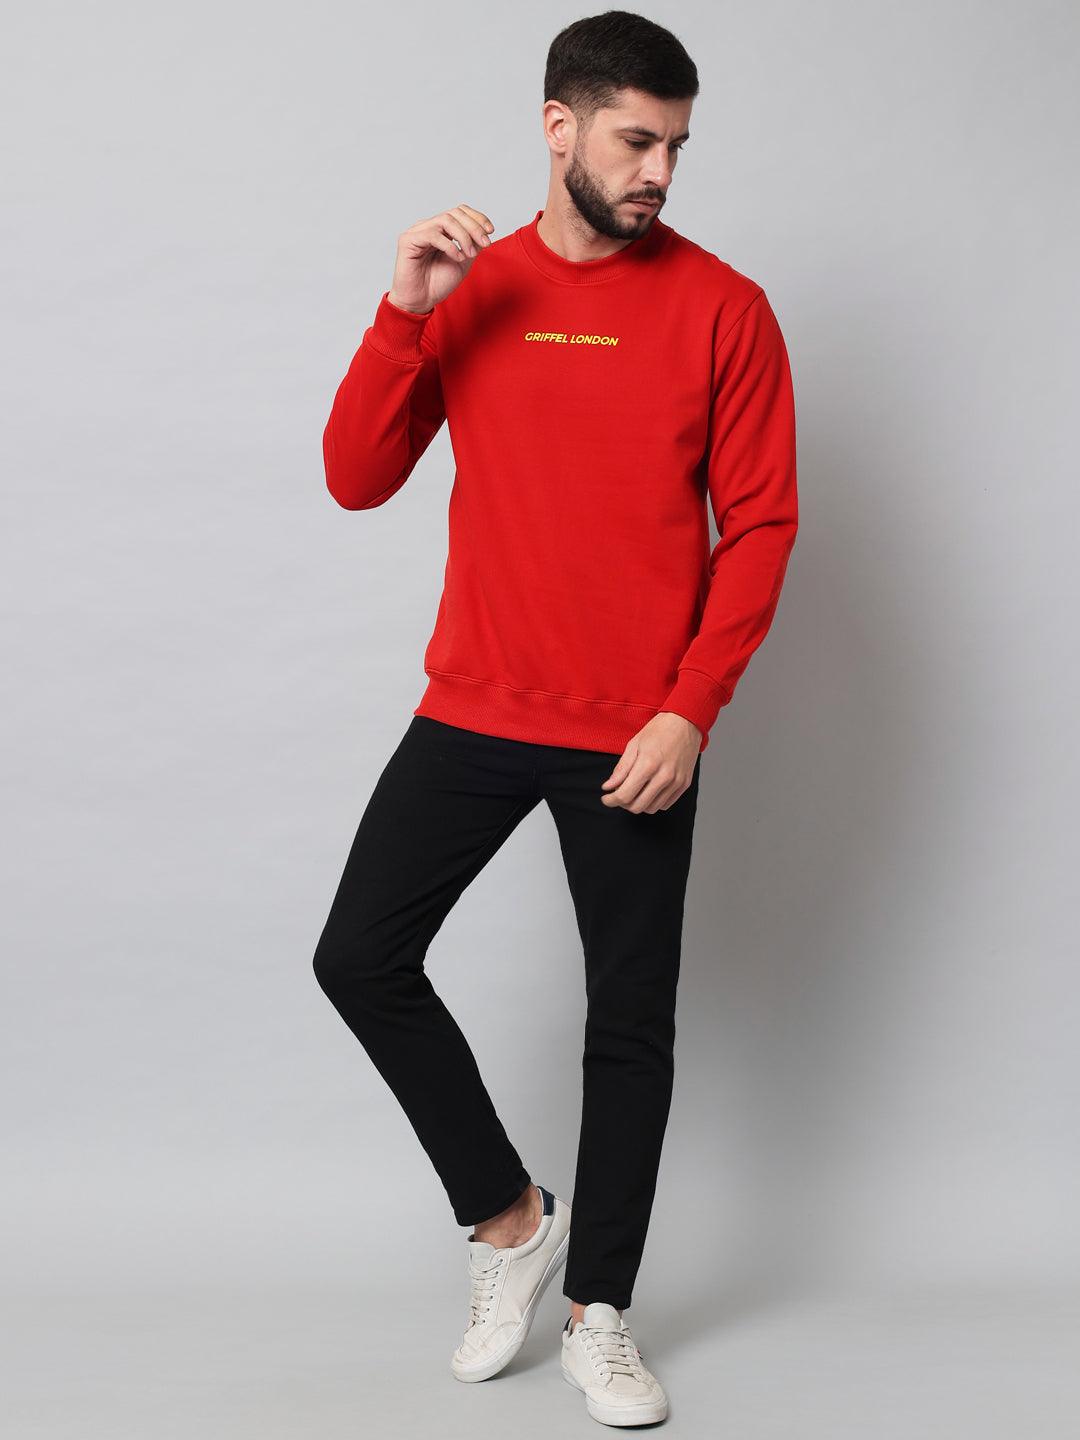 Griffel Men's Cotton Fleece Round Neck Red Sweatshirt with Full Sleeve and Front Logo Print - griffel